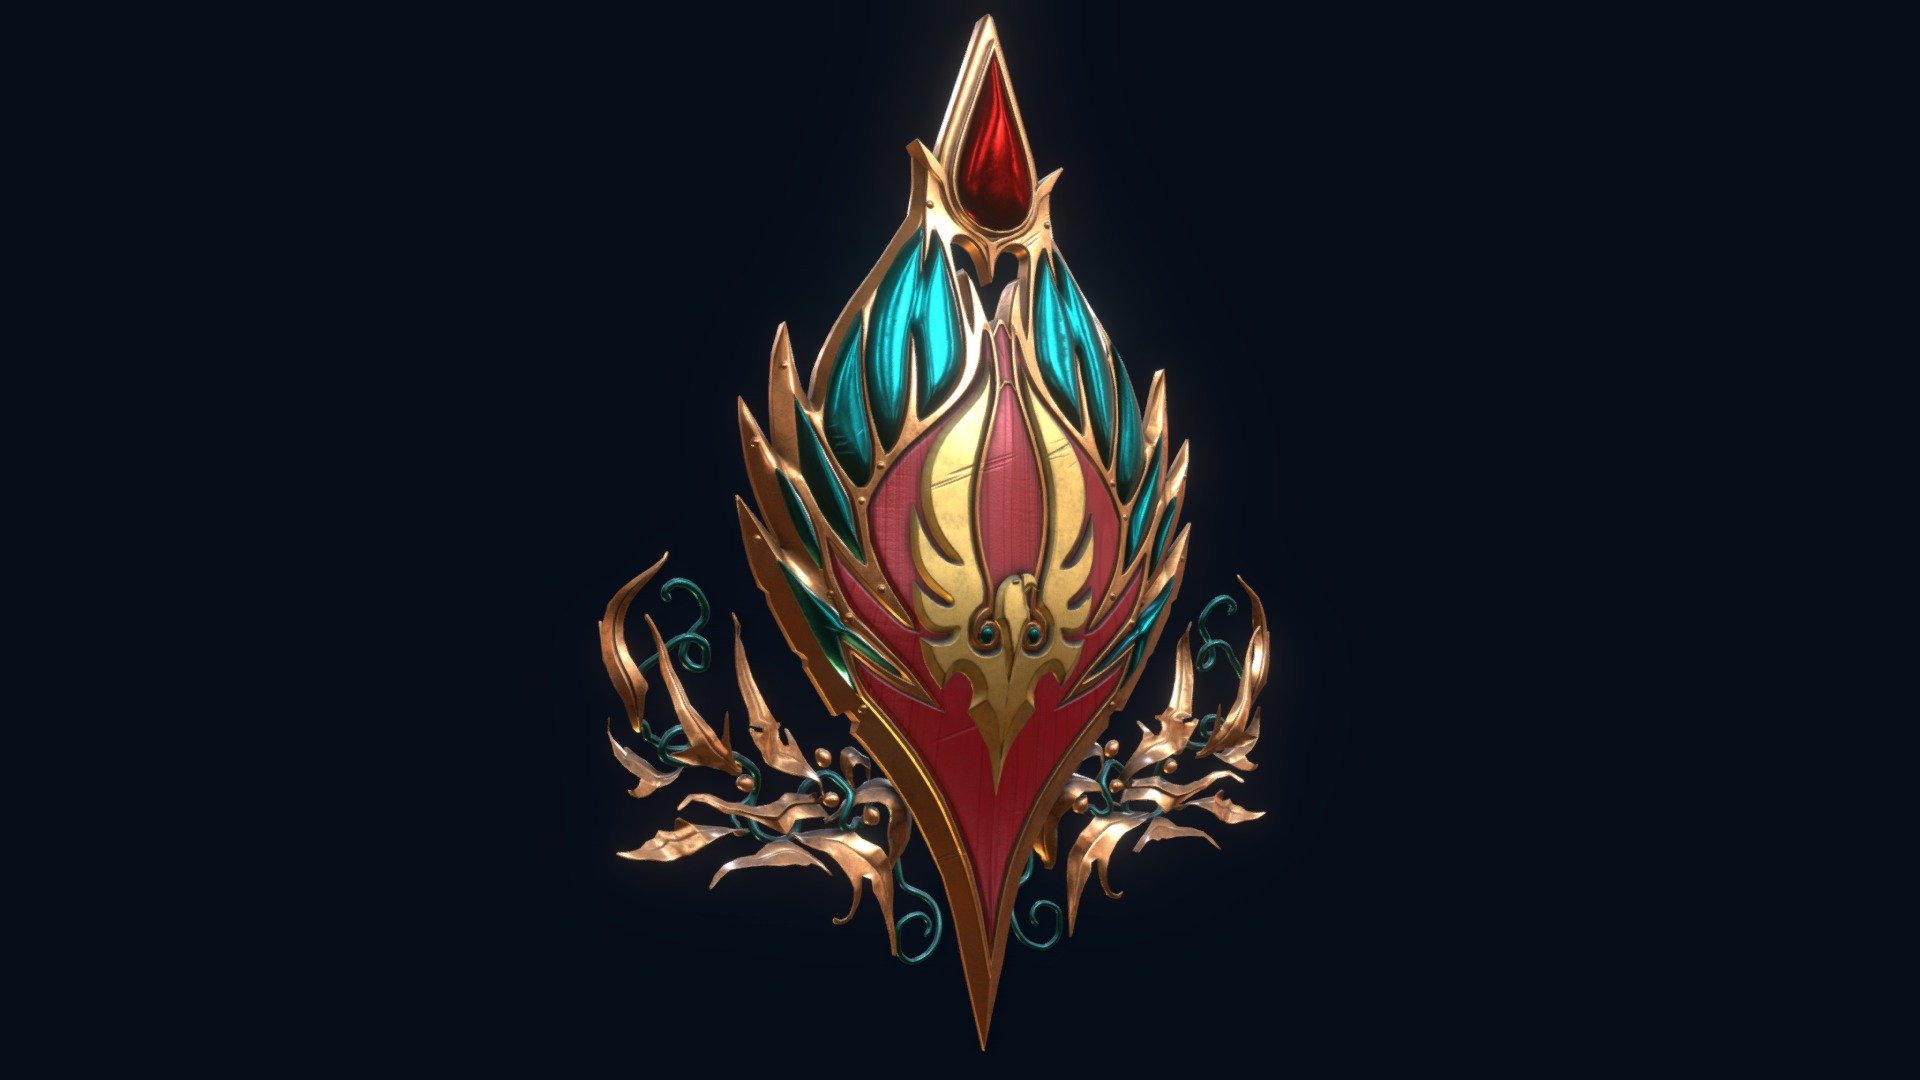 From my favorite videogame company, this is Blizzard's Blood Elves Crest, from World of Warcraft. This is the first of many that I will be creating, with some luck to be used as animated backgrounds 3d model